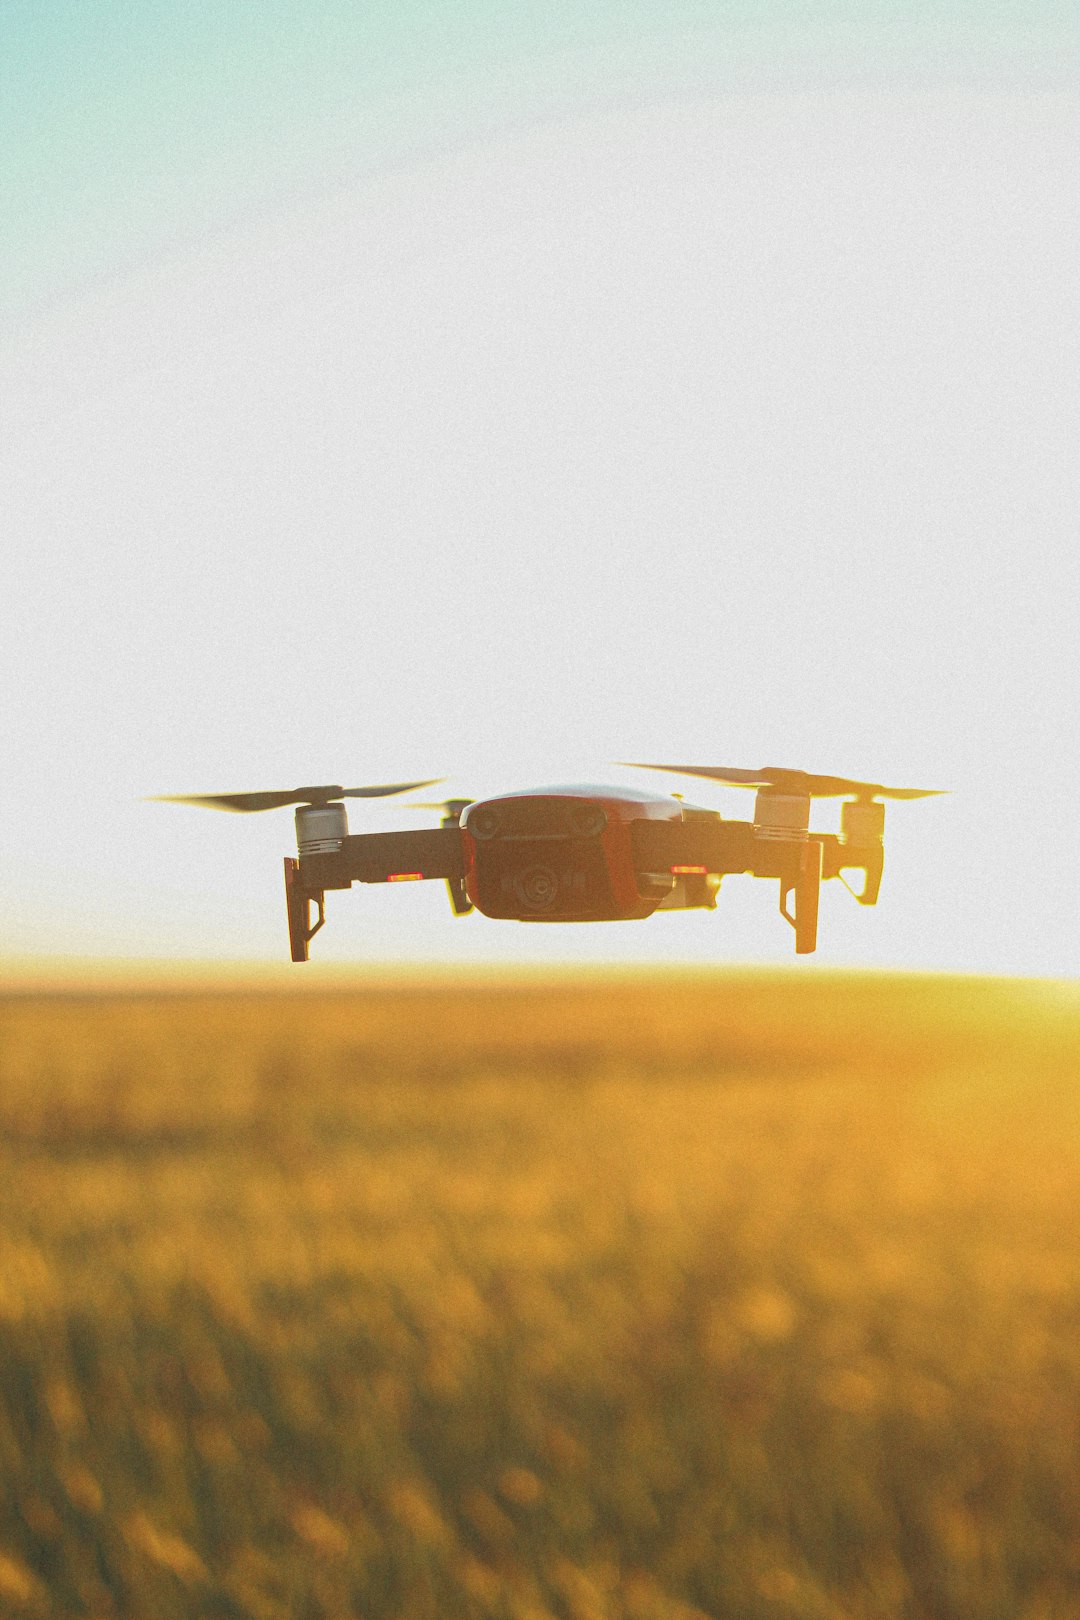 white and brown drone flying over brown grass field during daytime